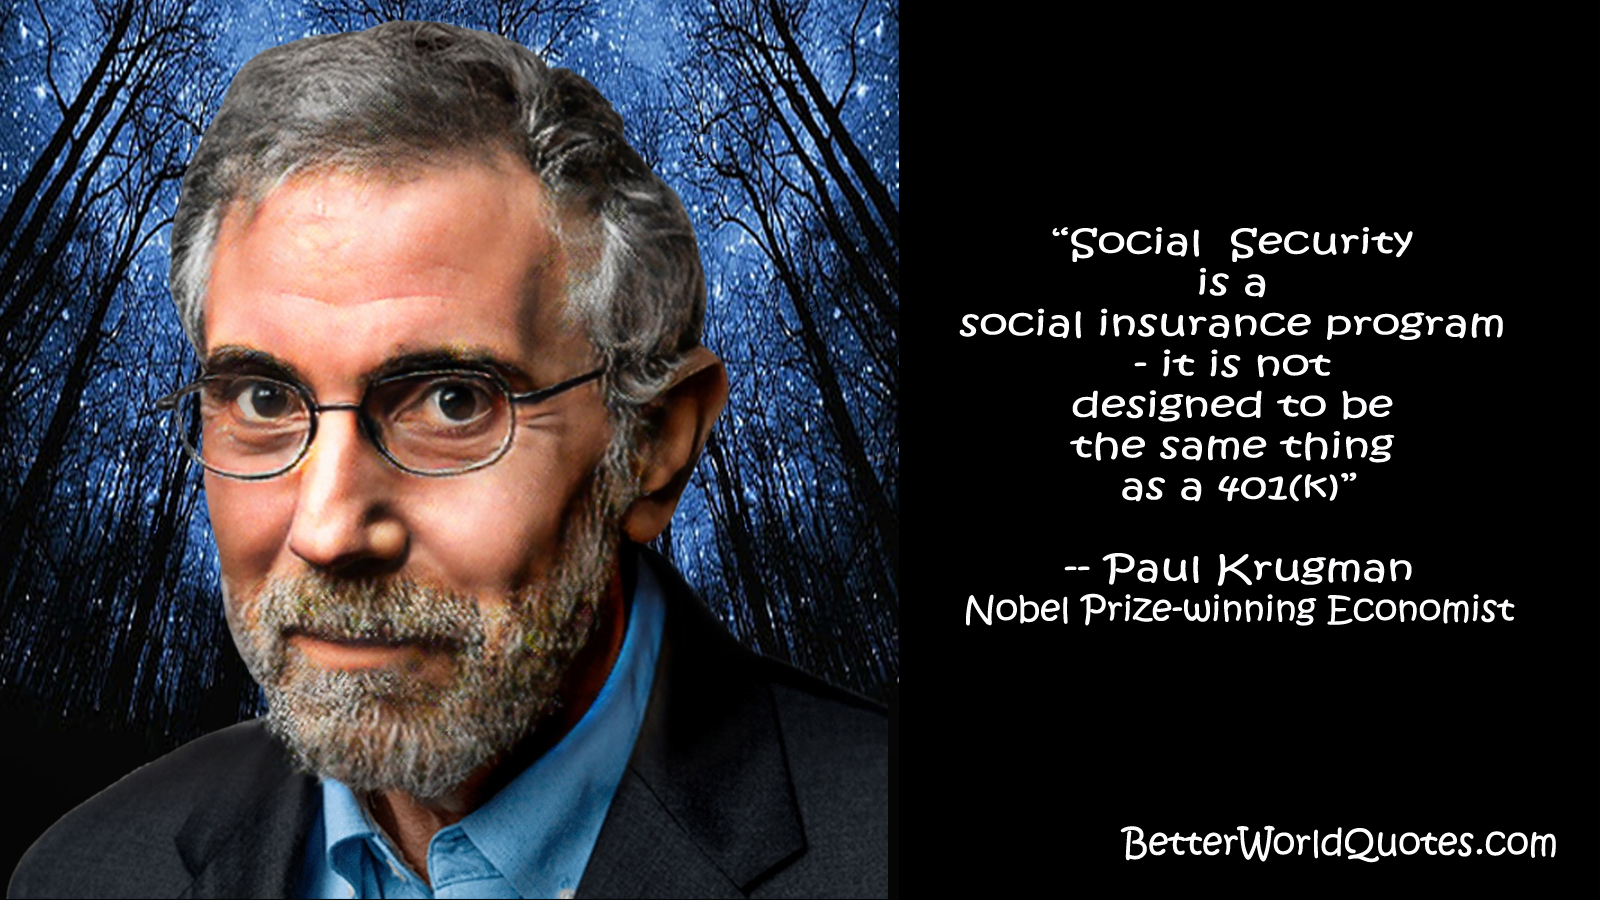 Paul Krugman: social security is a social insurance program - it is not designed to be the same thing as a 401k